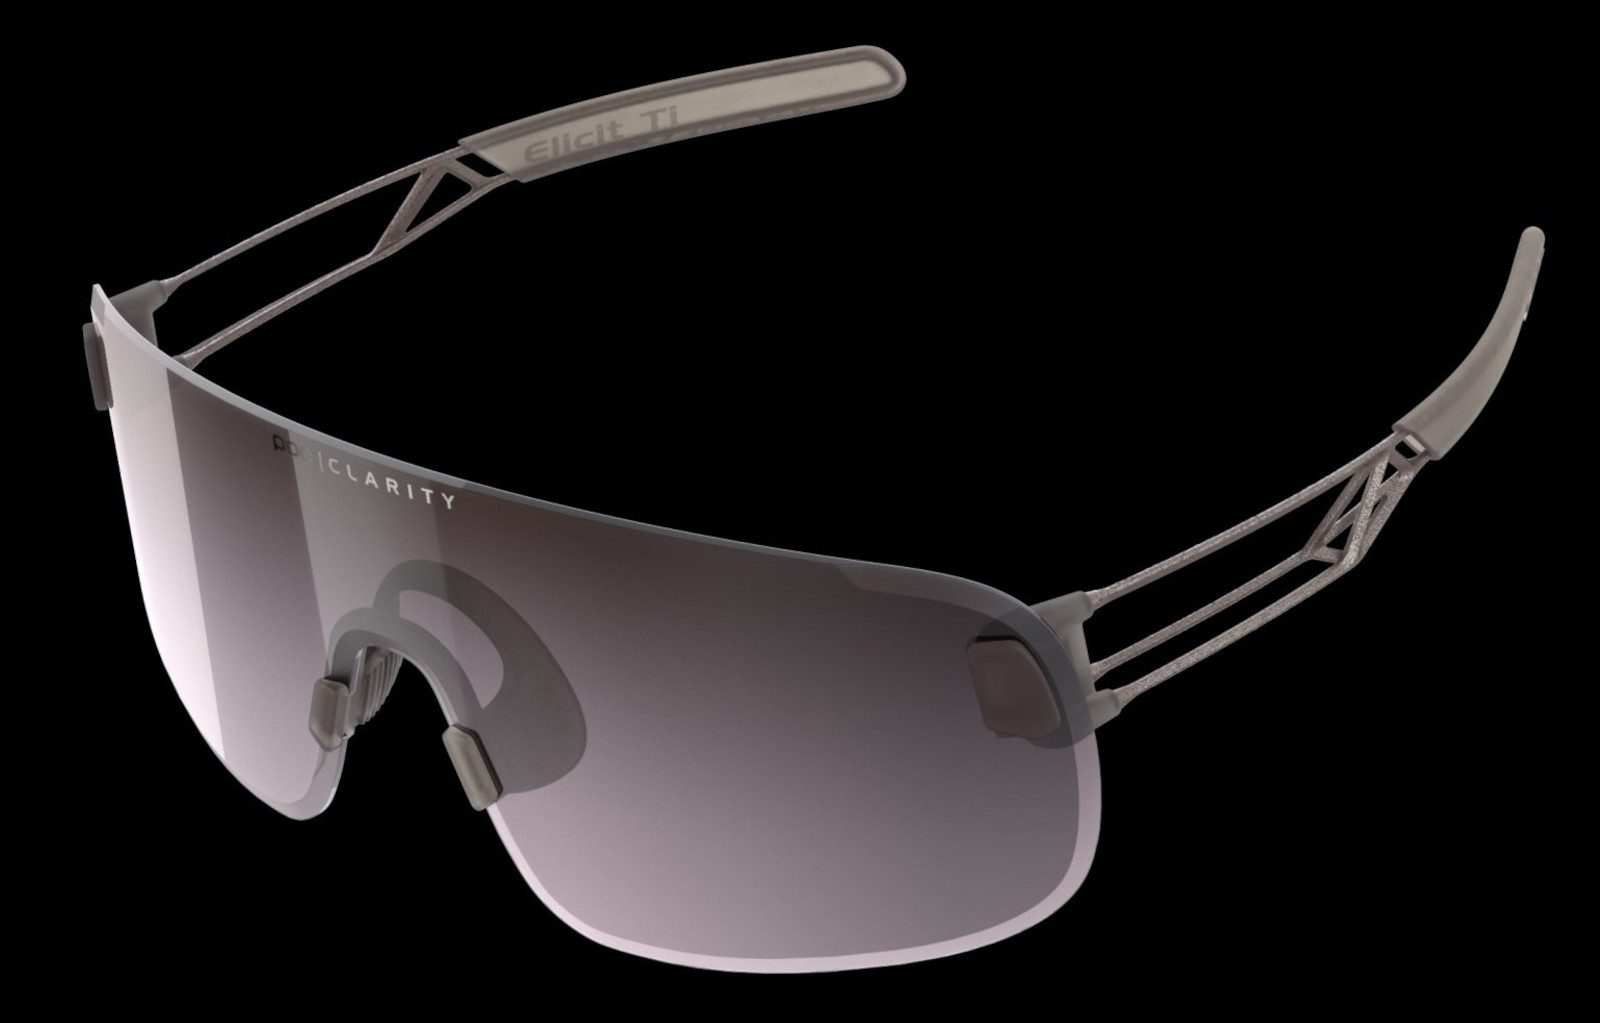 POC launches limited edition Elicit Ti sunglasses - Canadian Cycling ...